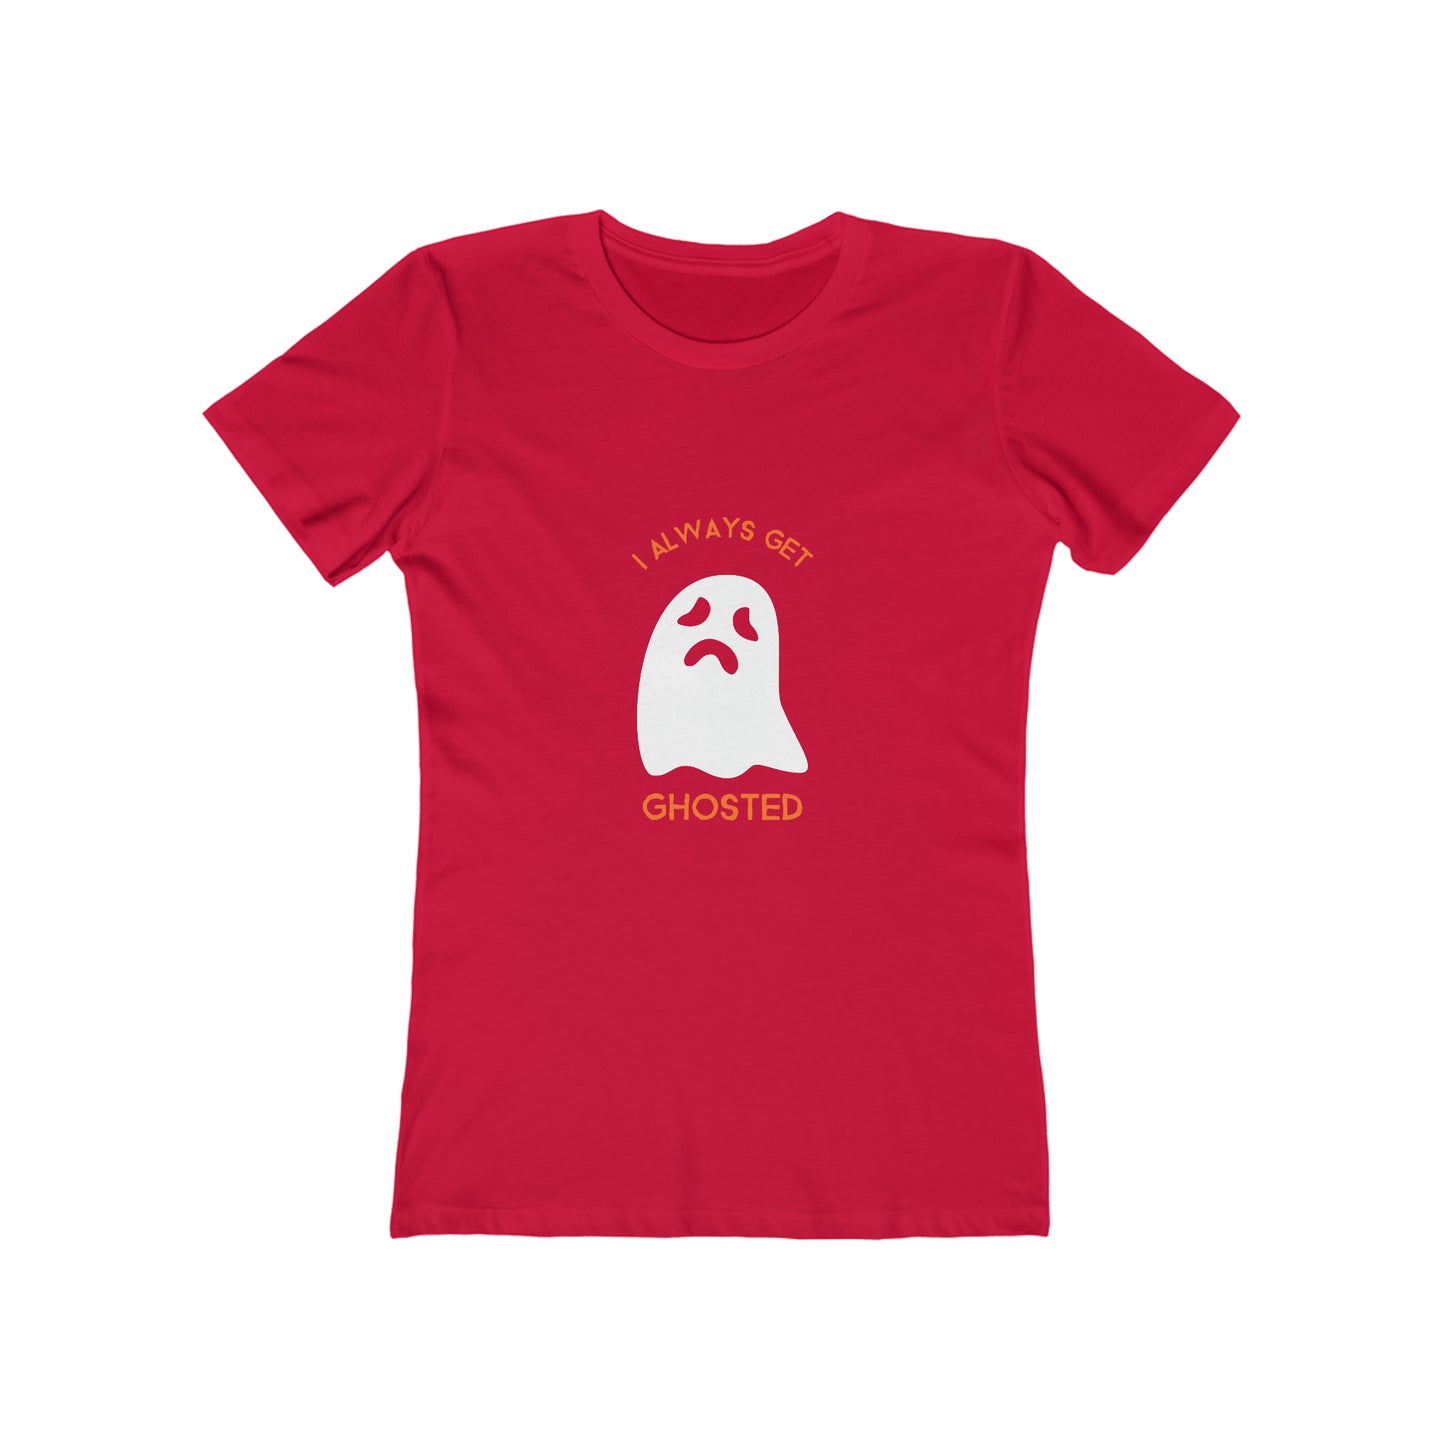 Pumpkin Spice And Everything Nice - Women's T-shirt